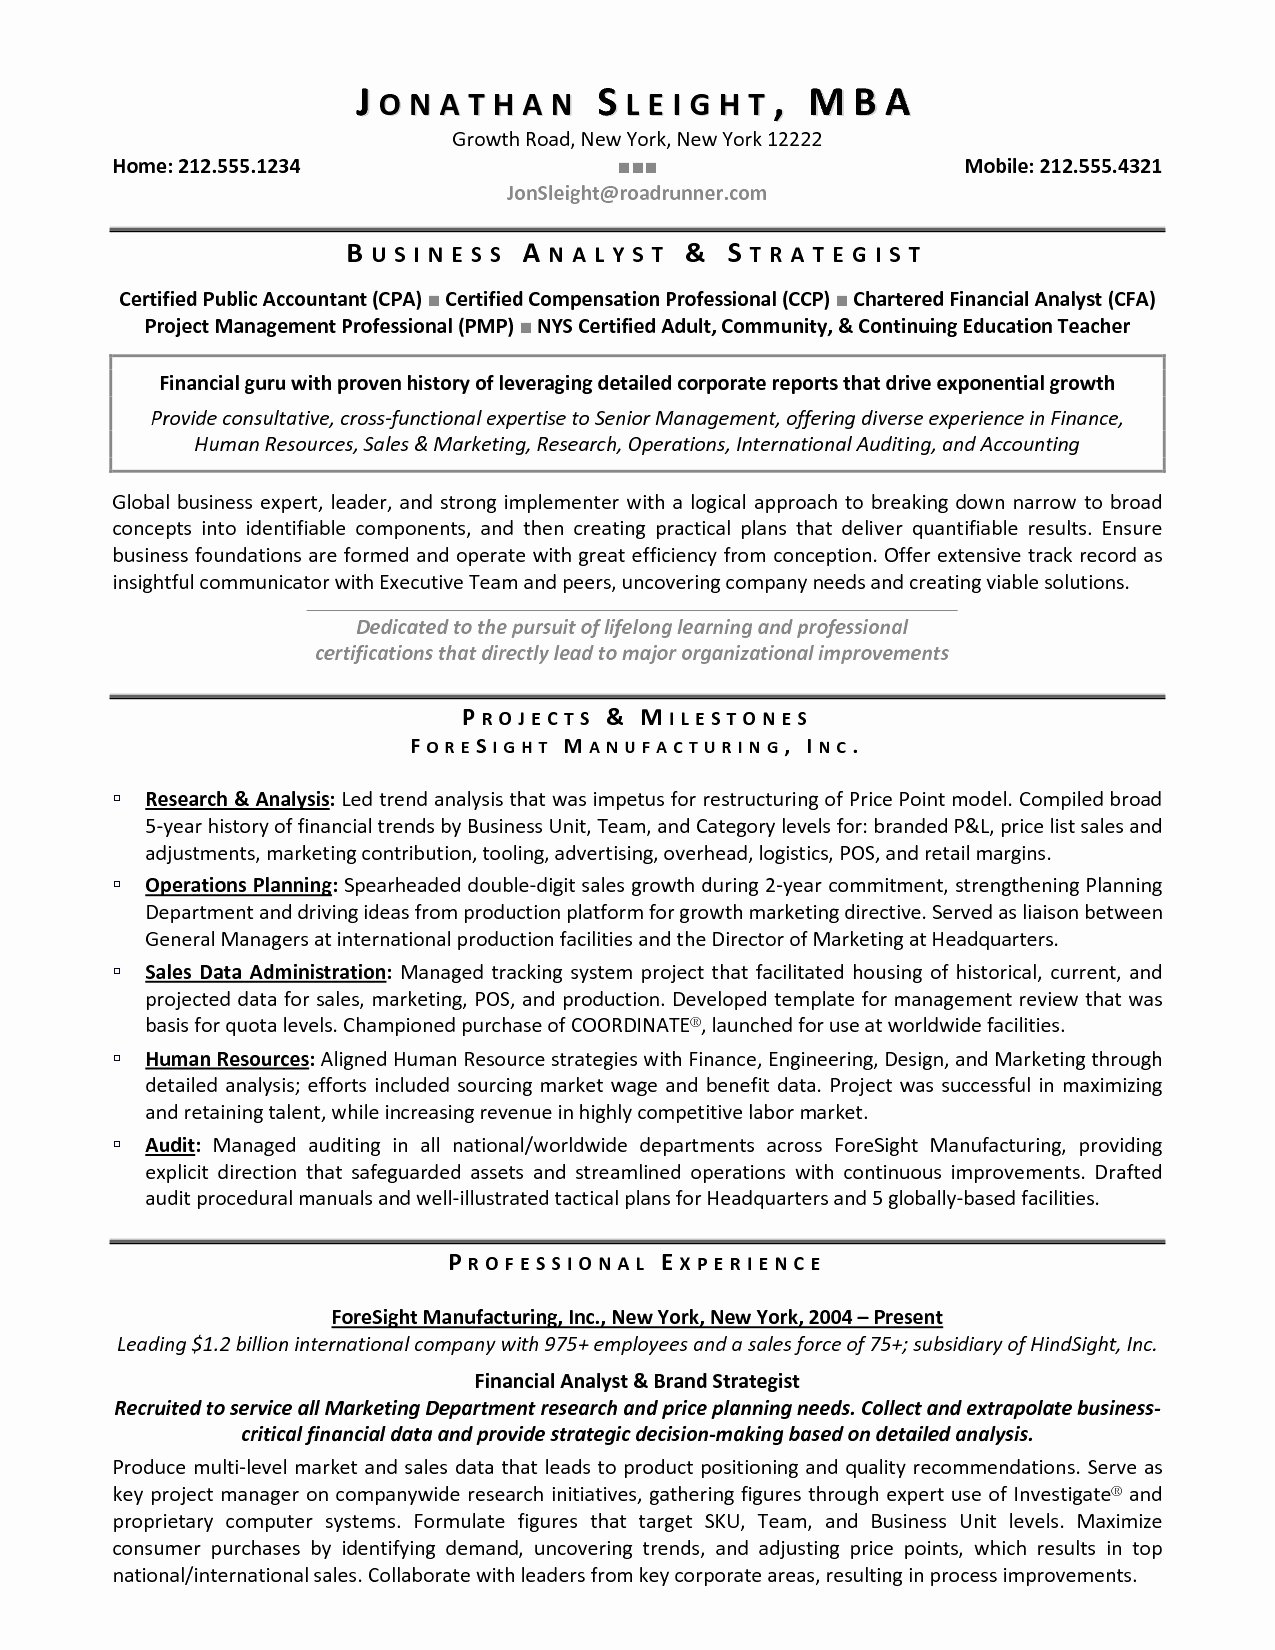 resume for mba application